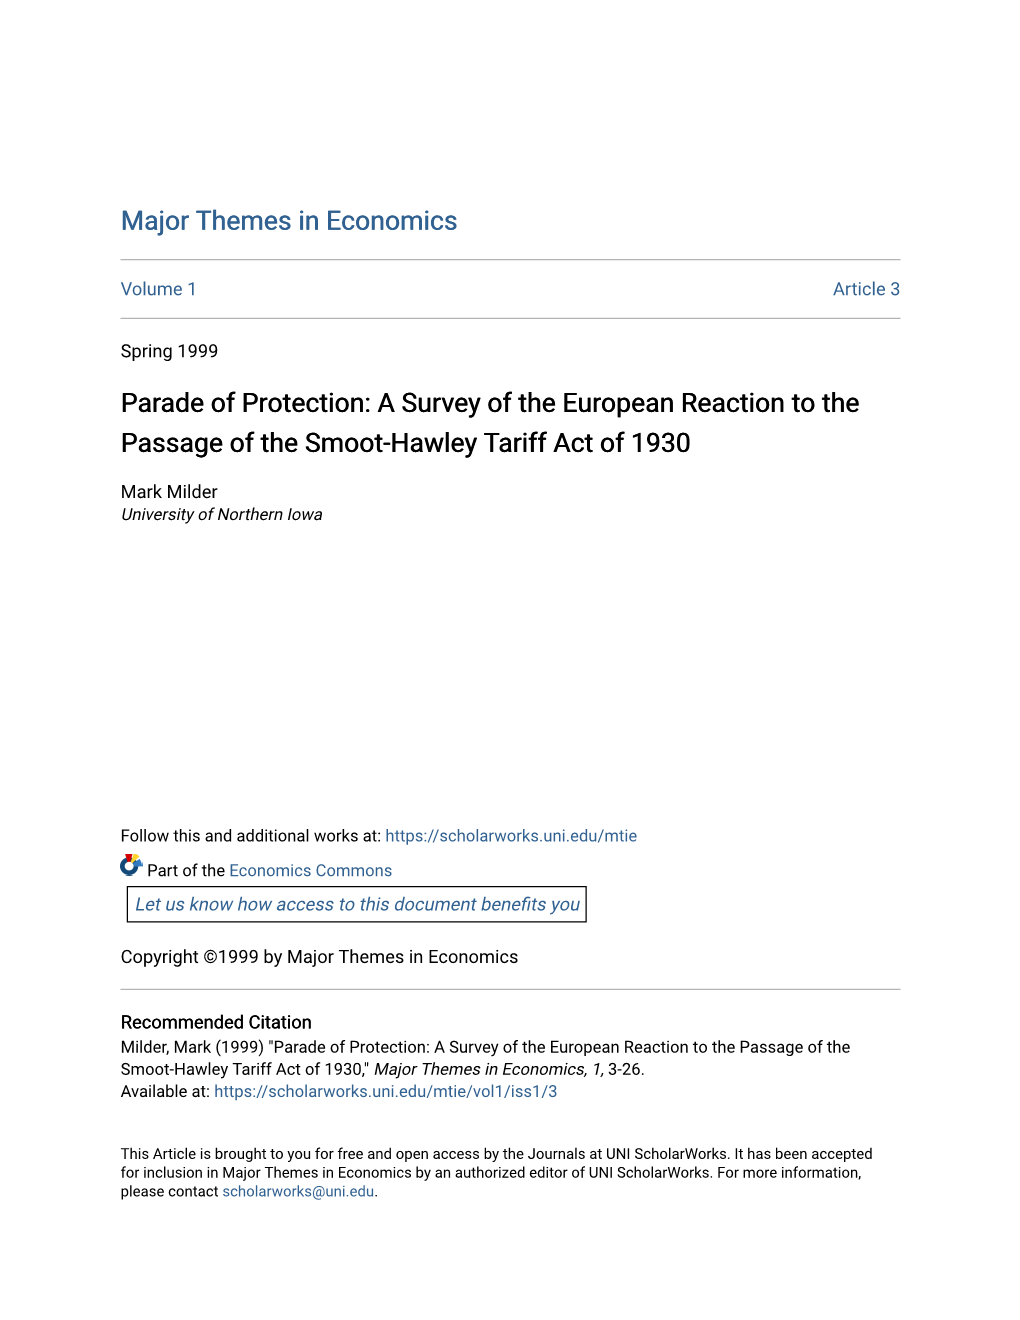 A Survey of the European Reaction to the Passage of the Smoot-Hawley Tariff Act of 1930